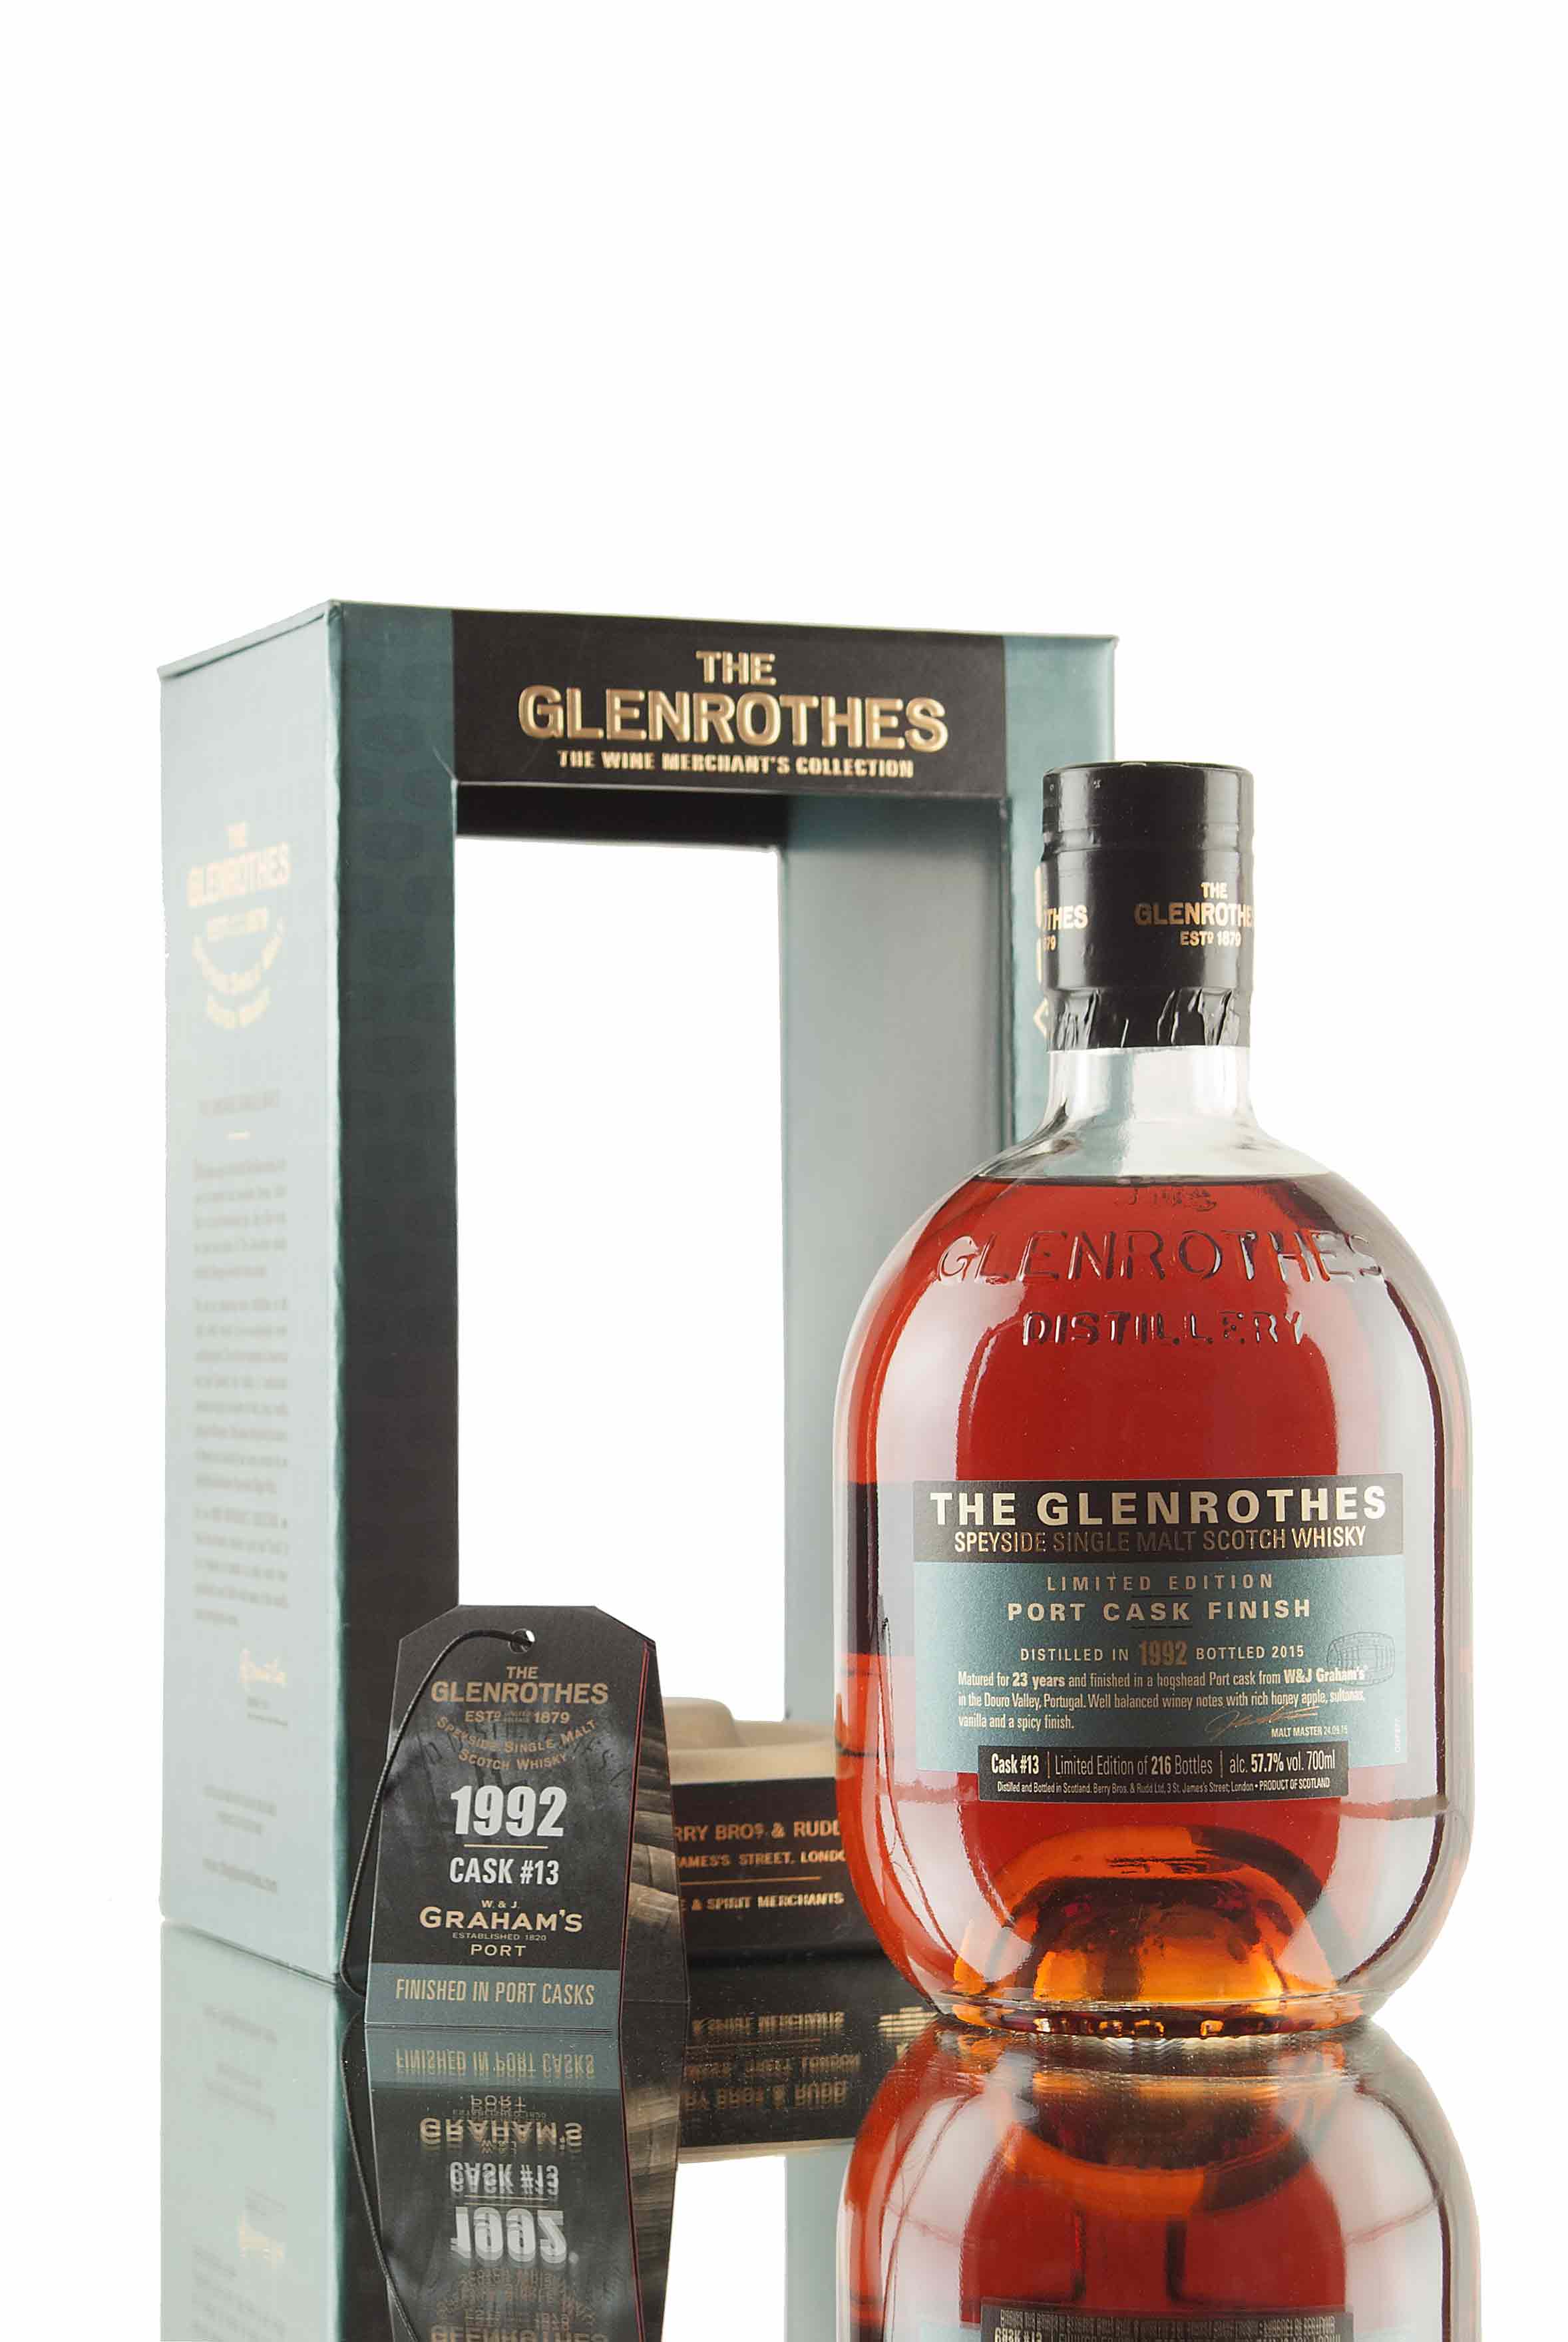 The Glenrothes Graham's Cask #13 | Wine Merchant's Collection